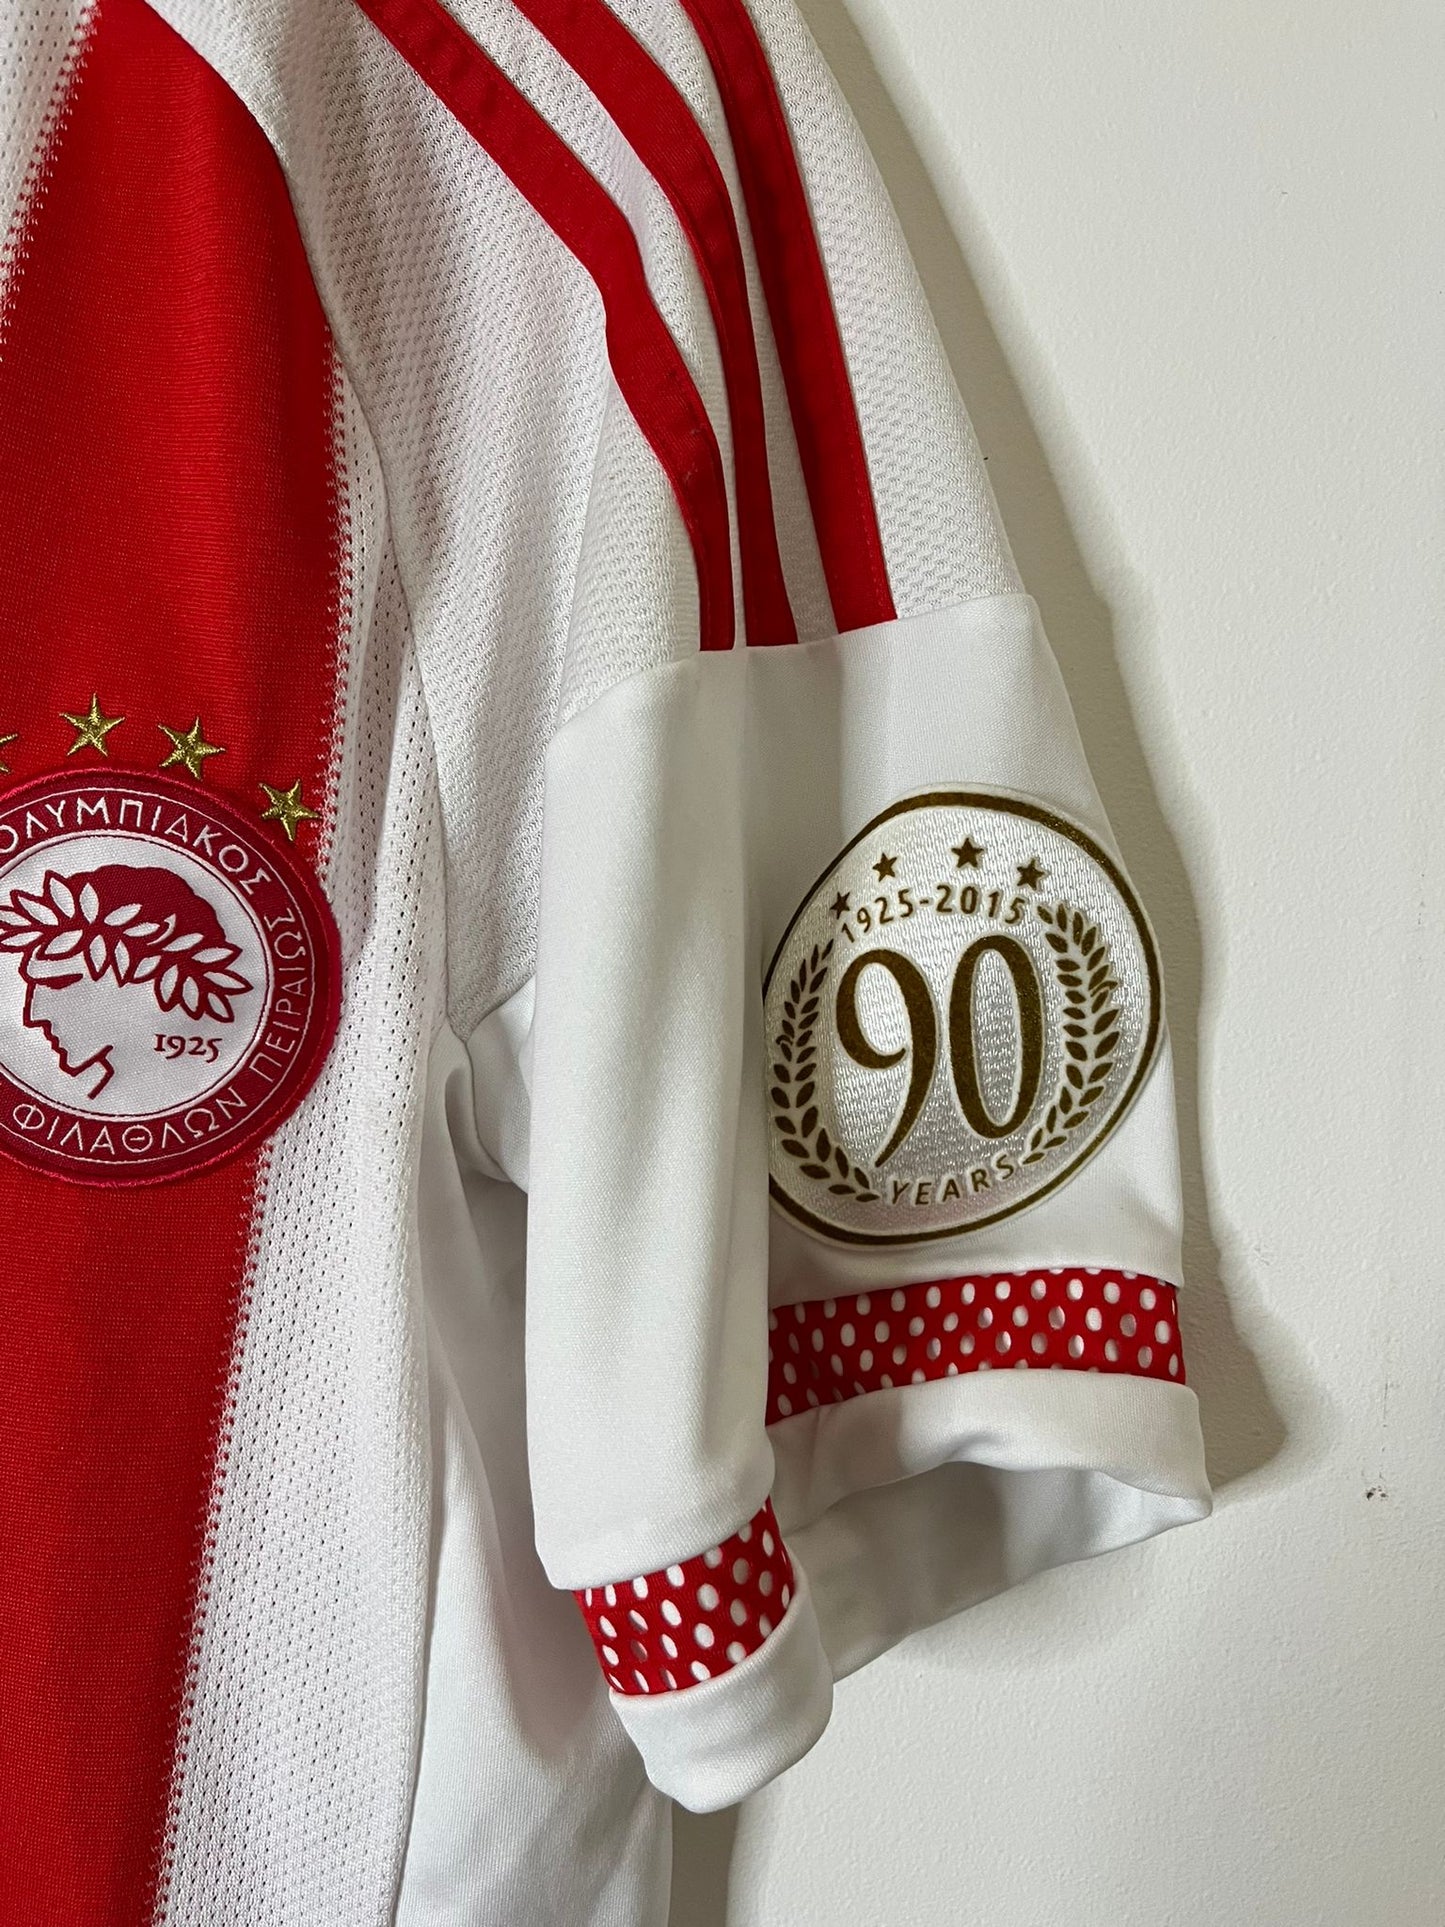 Olympiacos 90 years